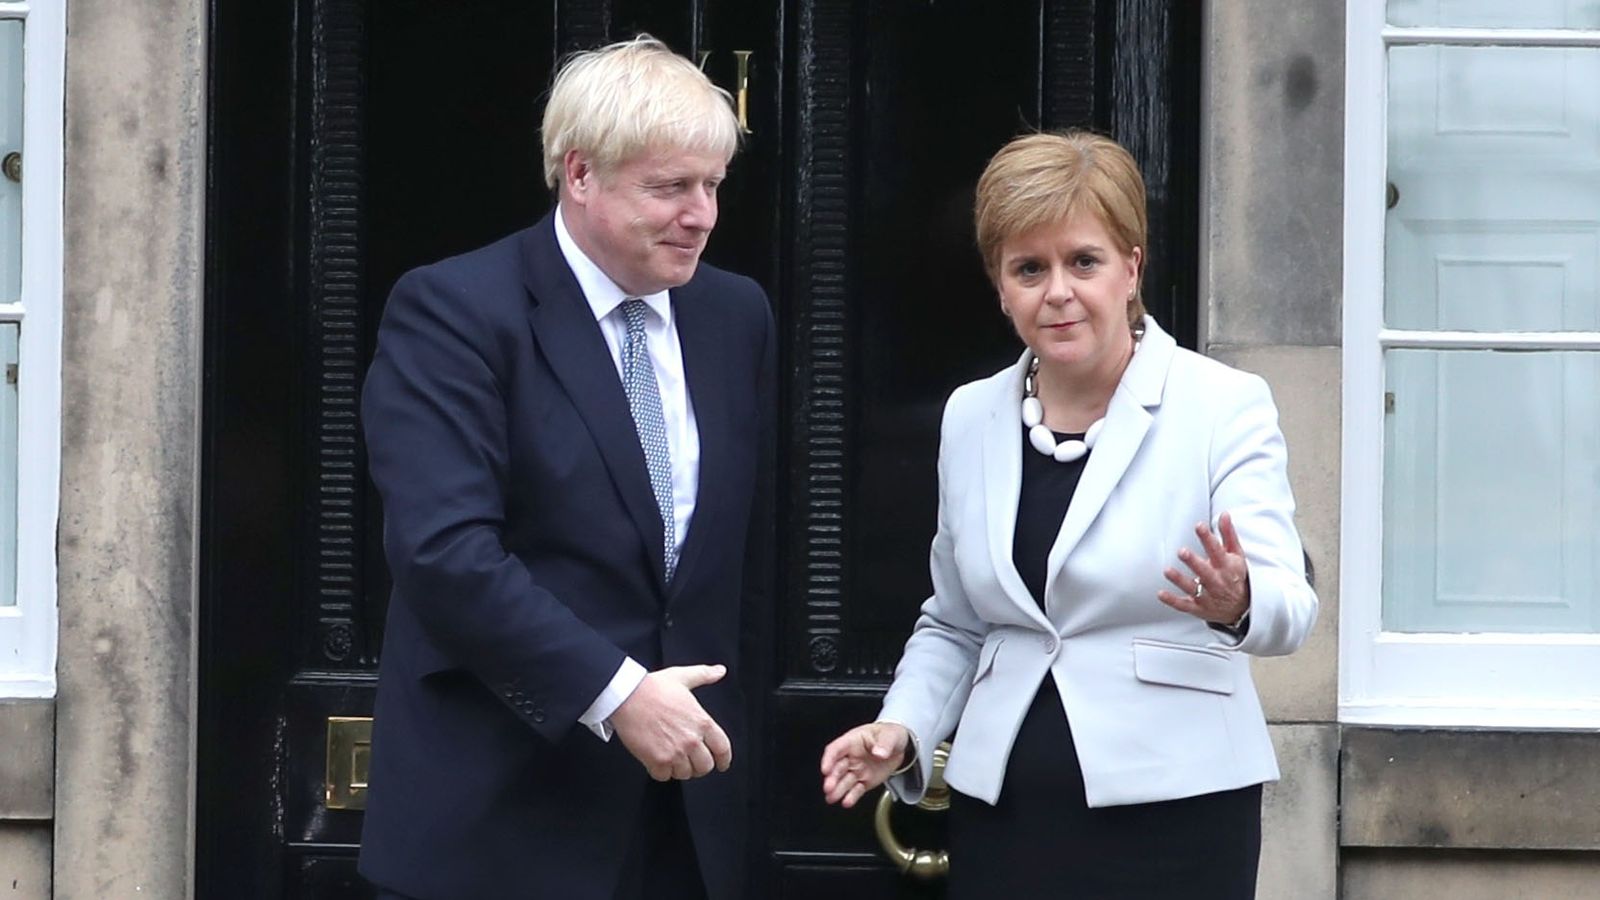 COVID inquiry: Nicola Sturgeon branded Boris Johnson a 'clown' in foul-mouthed messages during pandemic